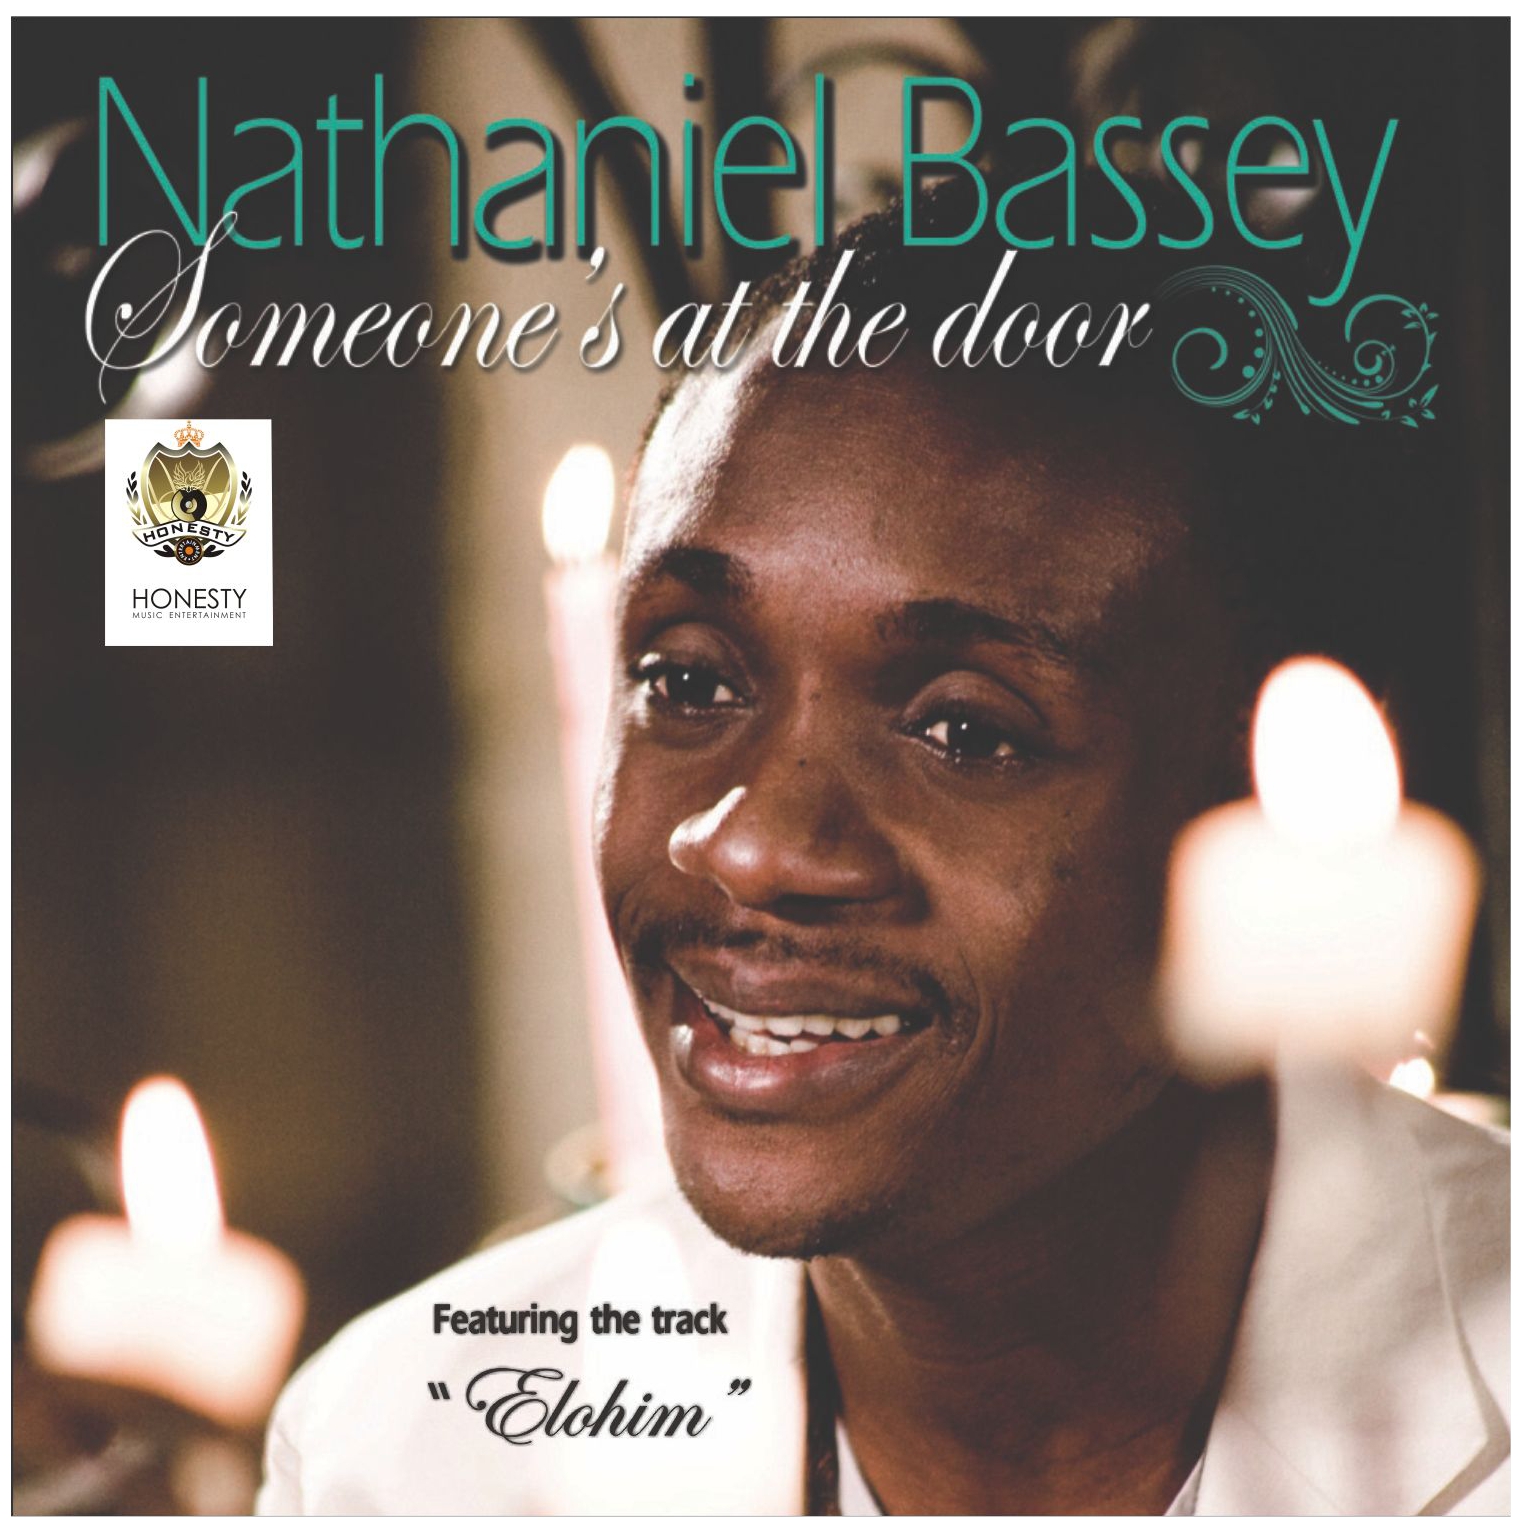 You are currently viewing Nathaniel Bassey